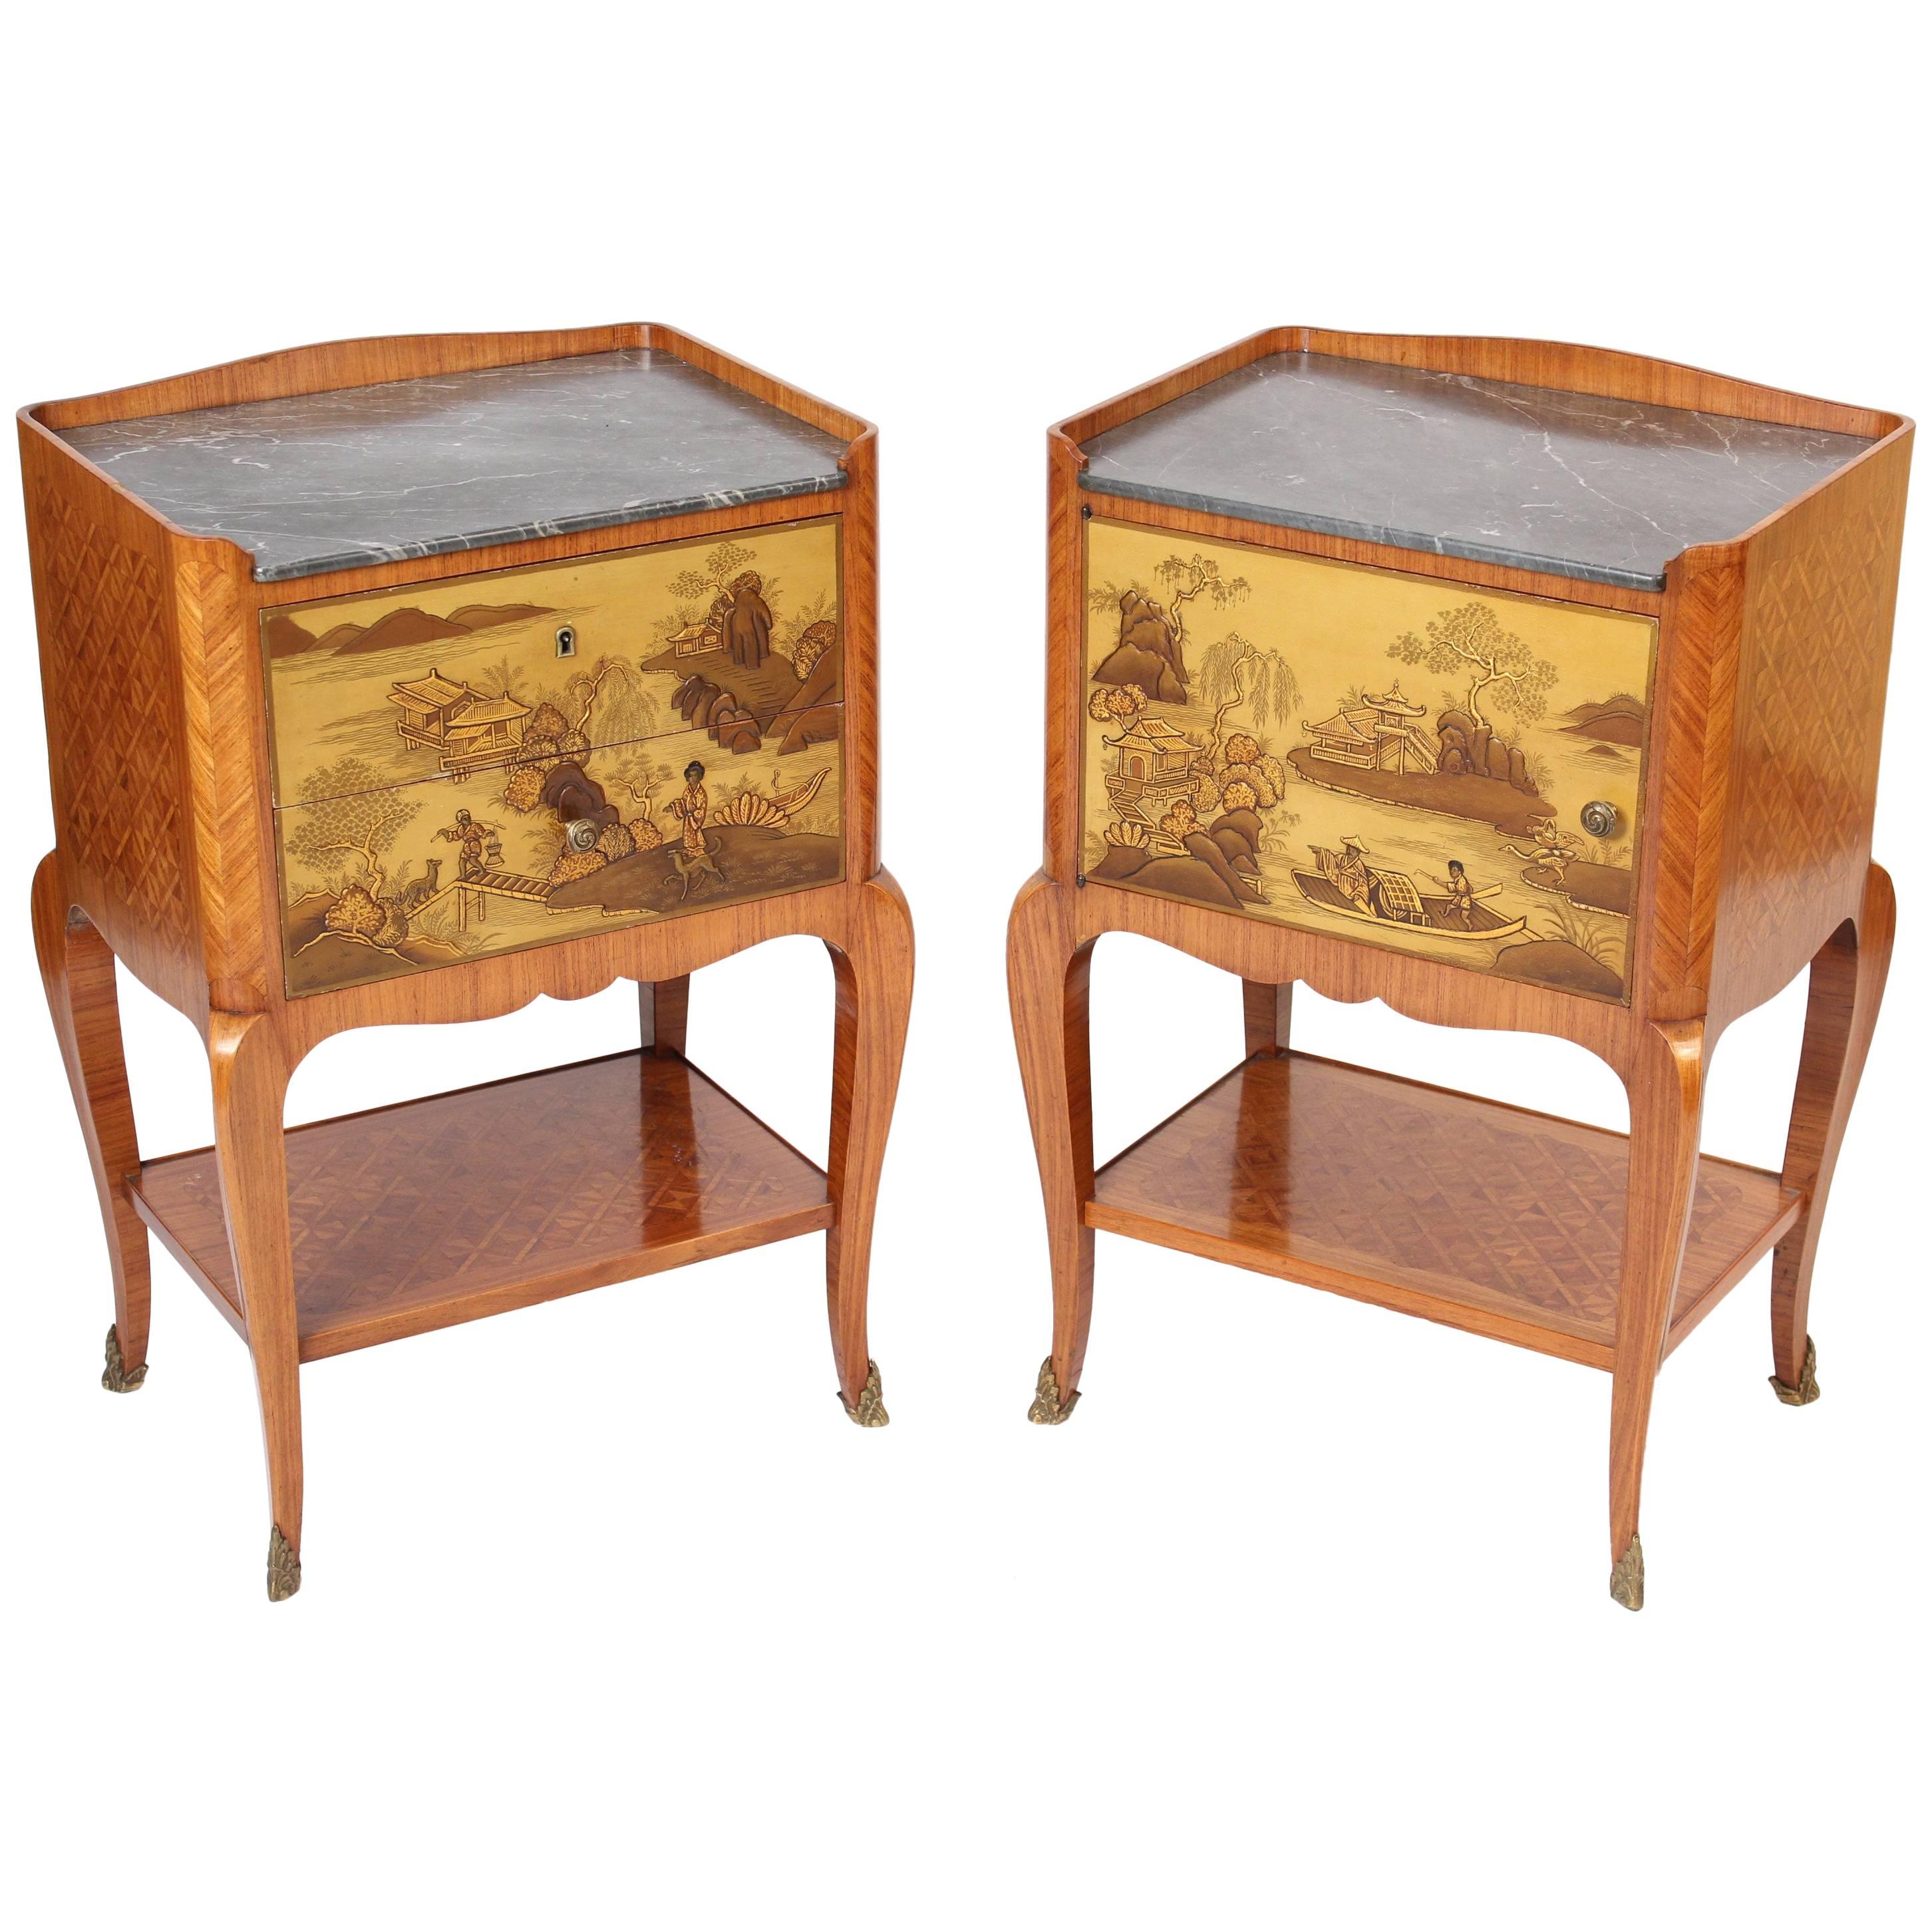 Pair of Louis XV Style Chinoiserie Decorated Occasional Tables